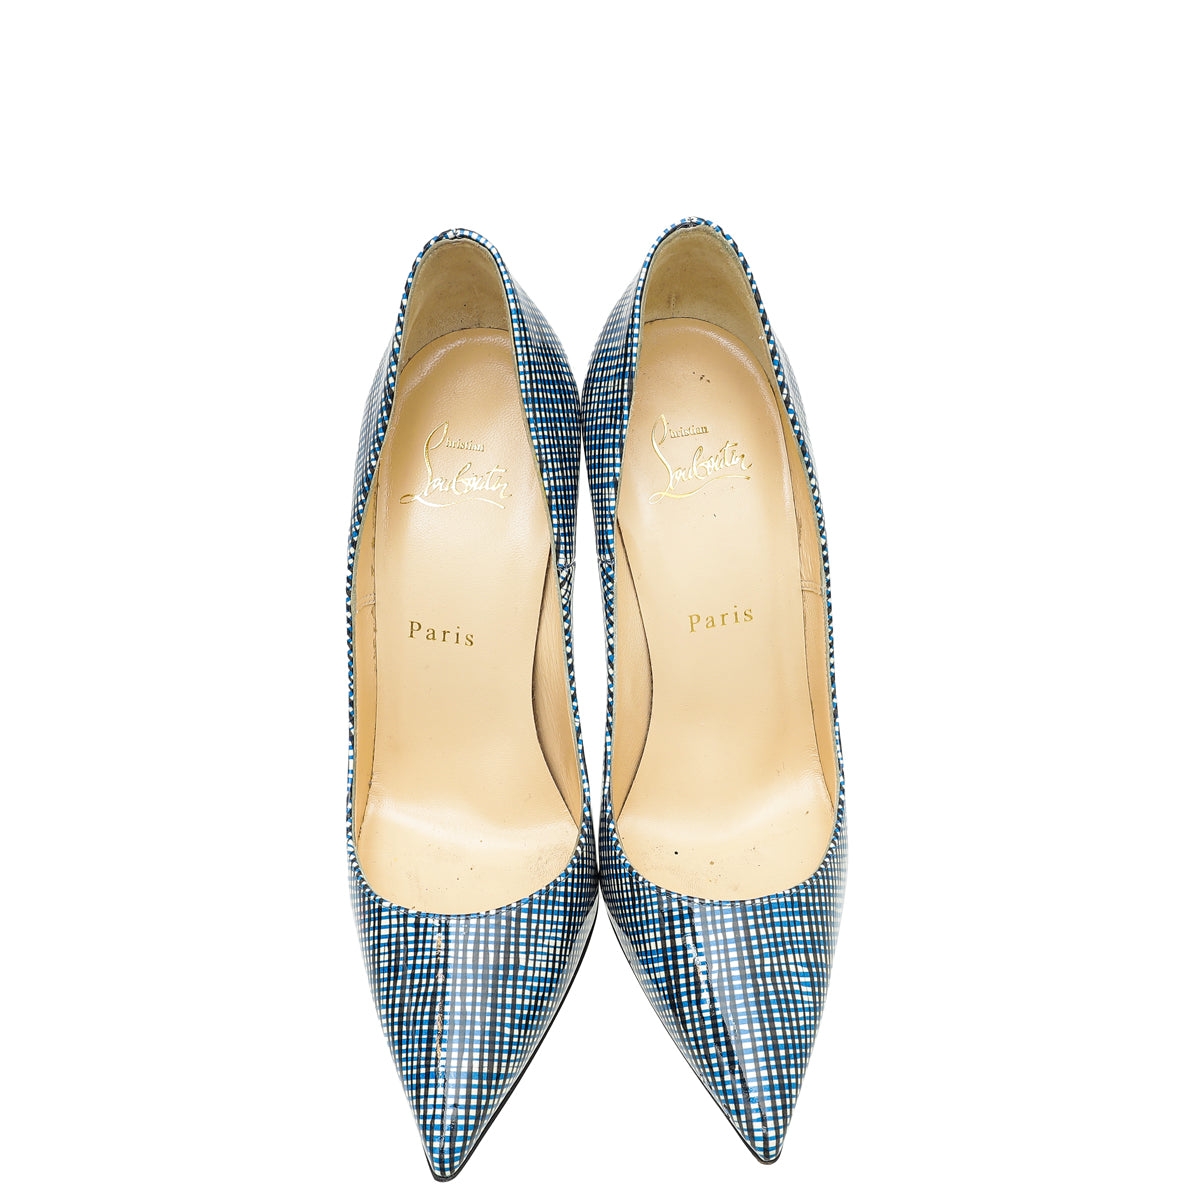 Christian Louboutin Tricolor Checkered So Kate 120 Pumps 37.5